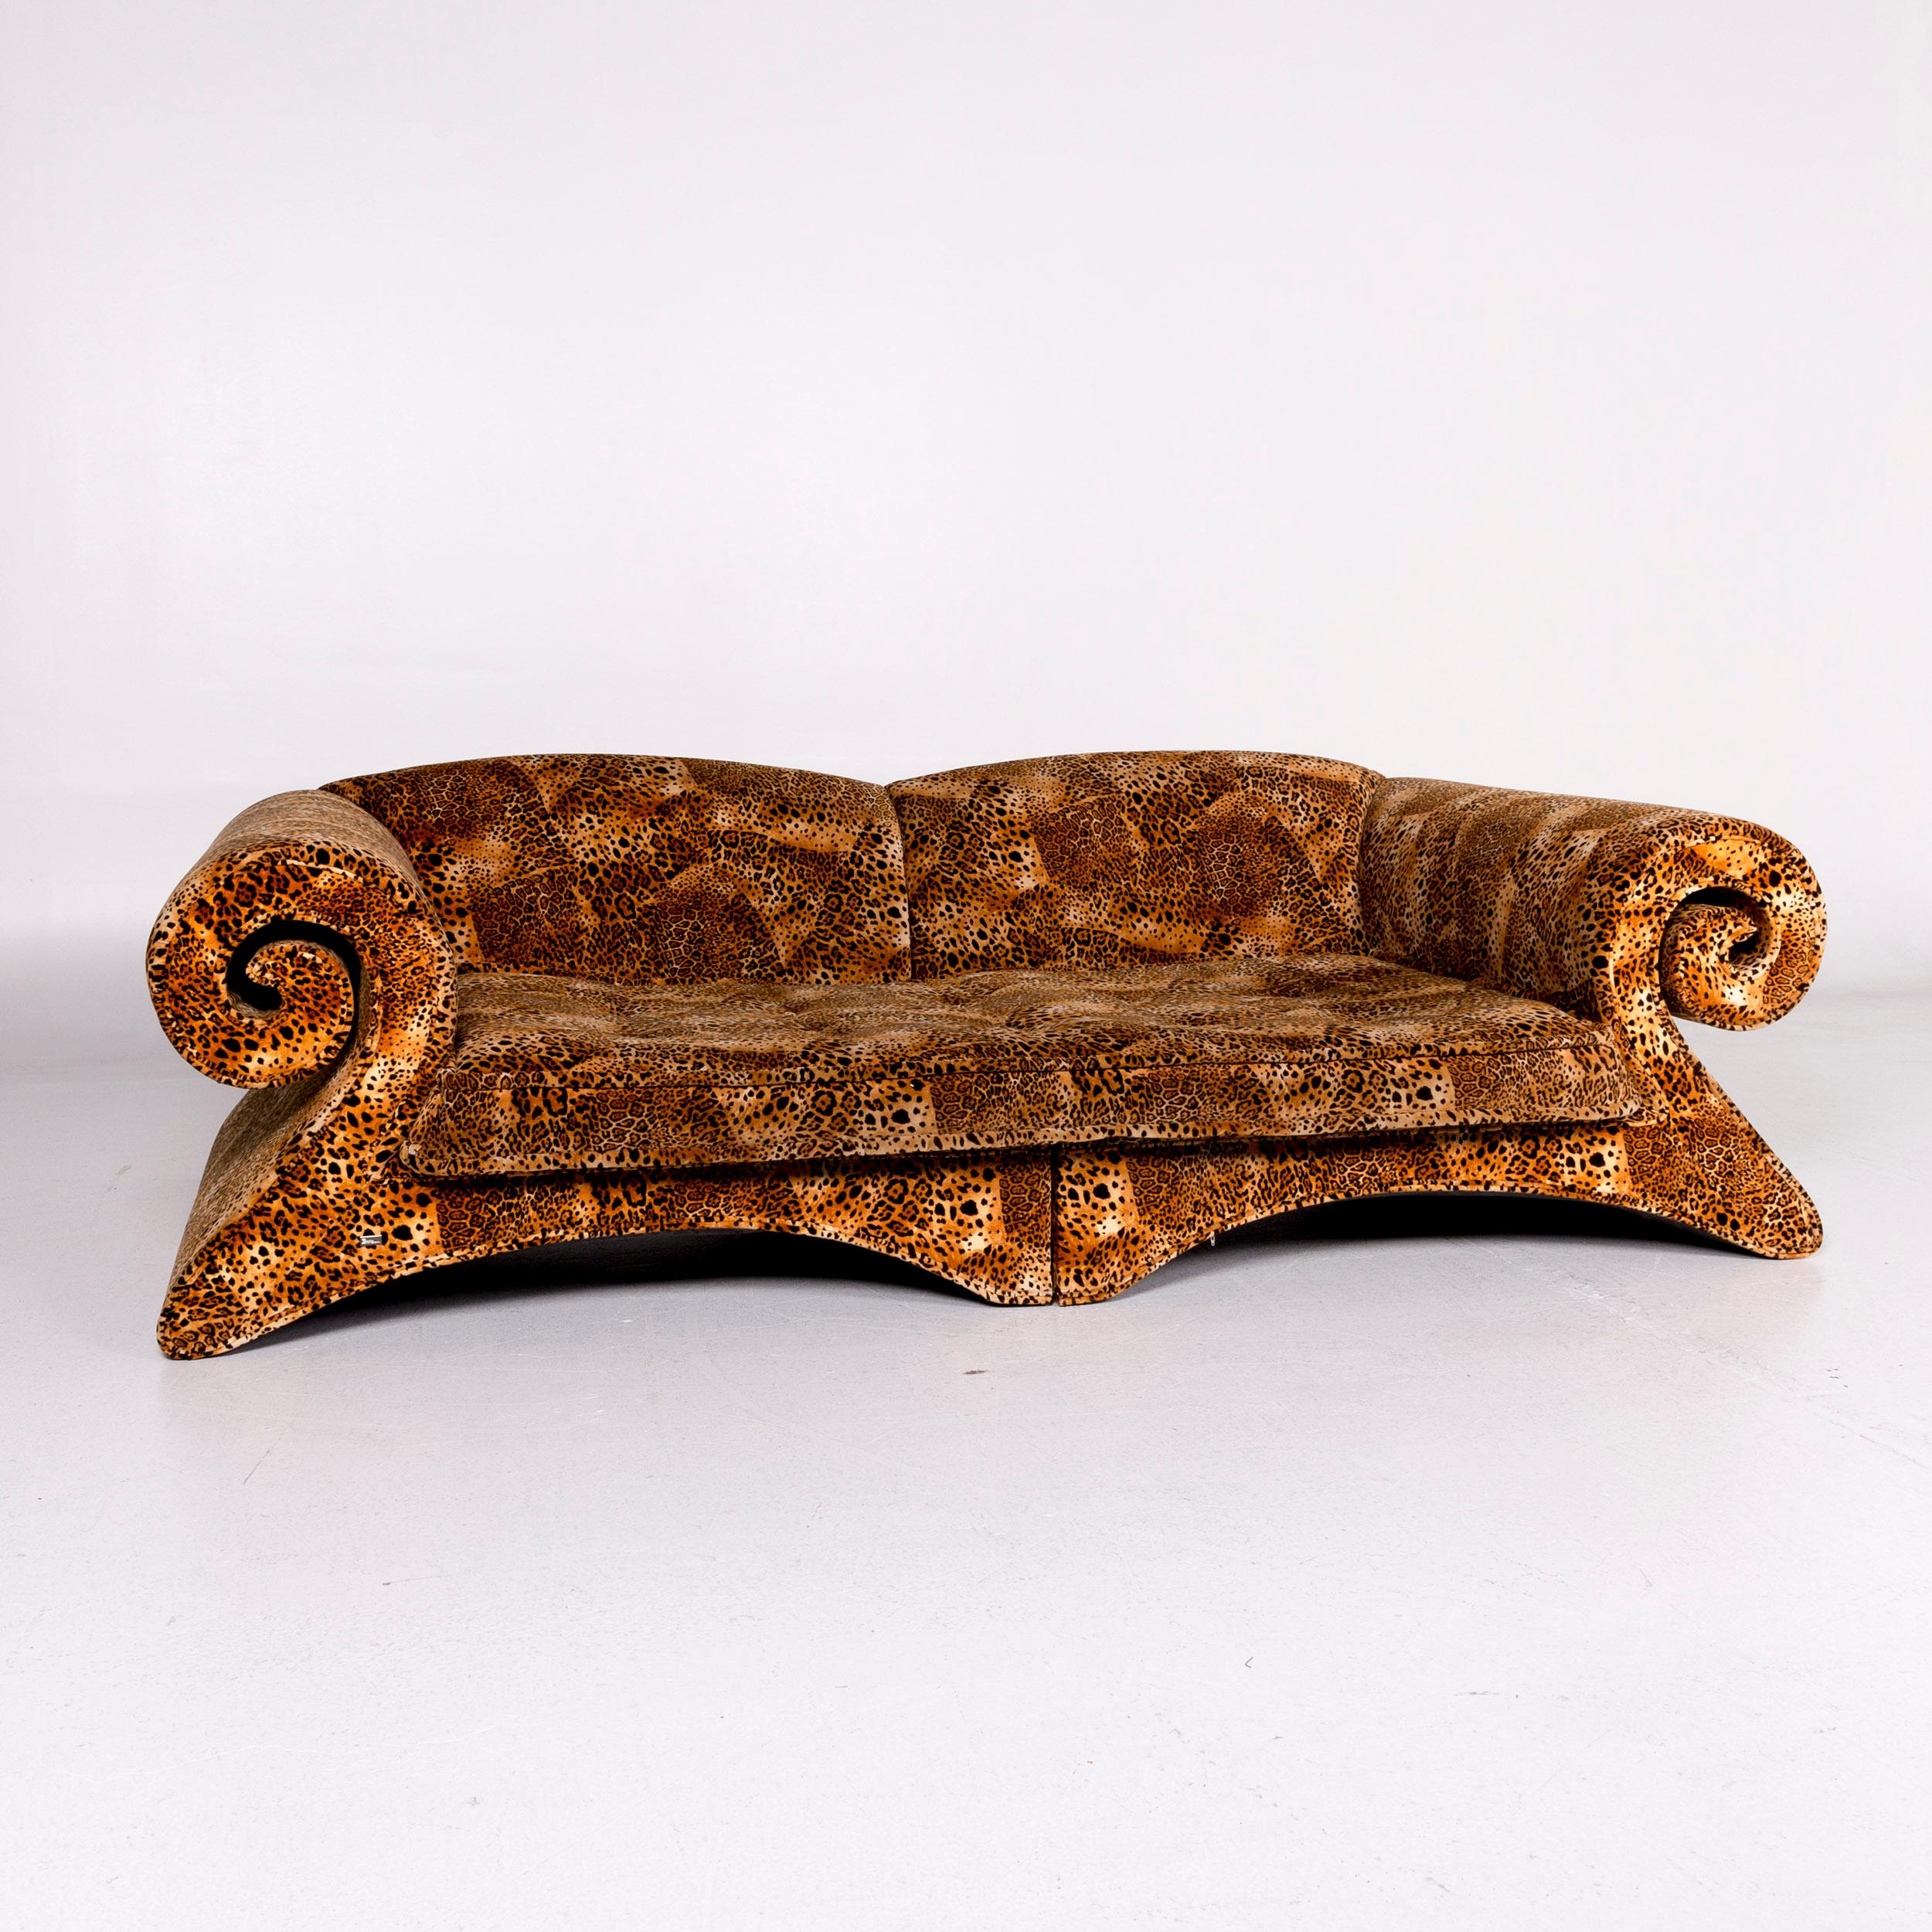 We bring to you a Bretz monster velvet fabric sofa brown ocher-brown patterned leoprint leomuster.
   
 
 Product measurements in centimeters:
 
Depth 130
Width 280
Height 85
Seat-height 45
Rest-height 75
Seat-depth 105
Seat-width